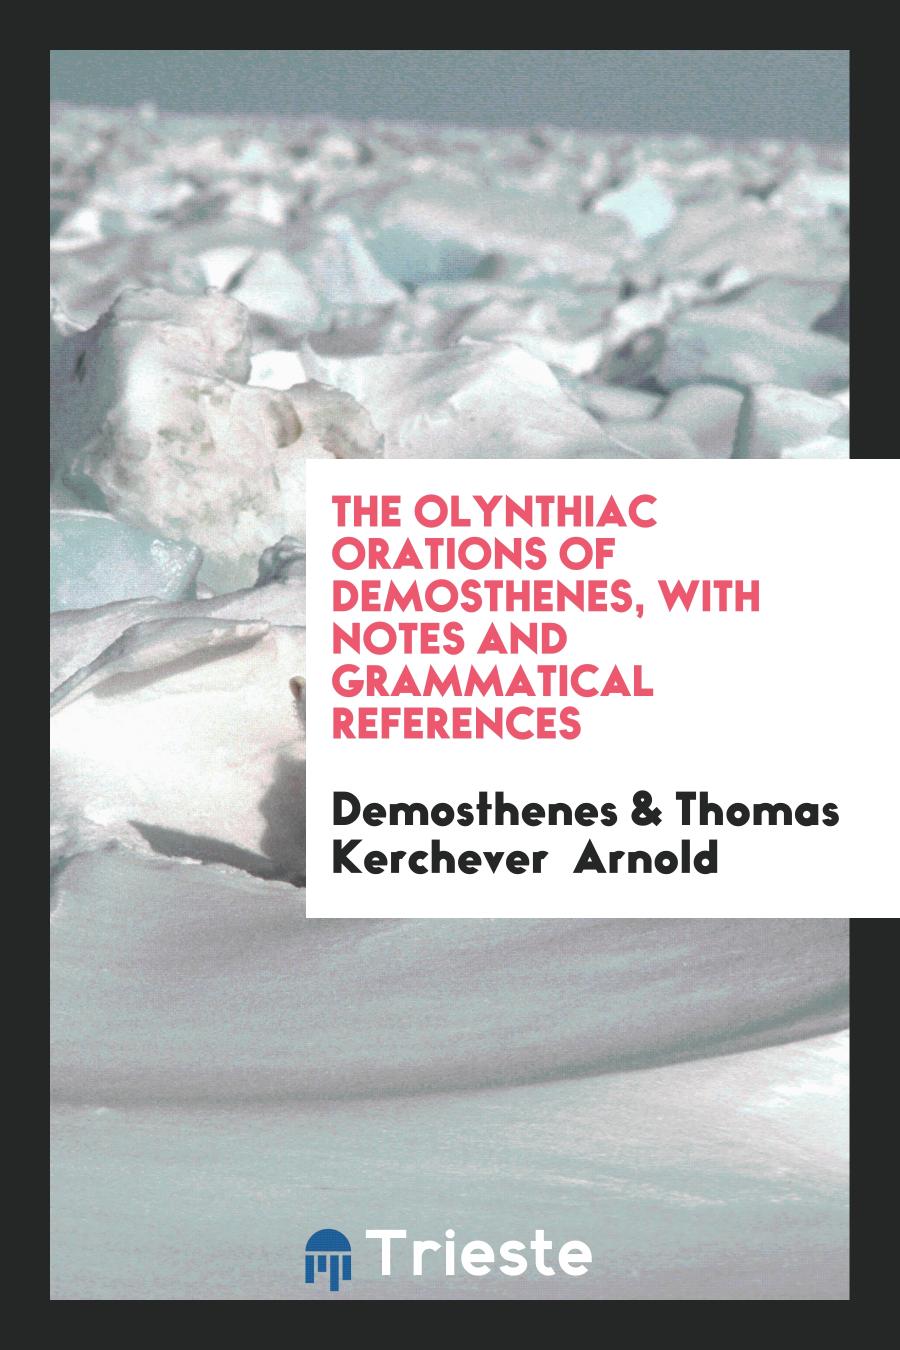 The Olynthiac Orations of Demosthenes, with Notes and Grammatical References